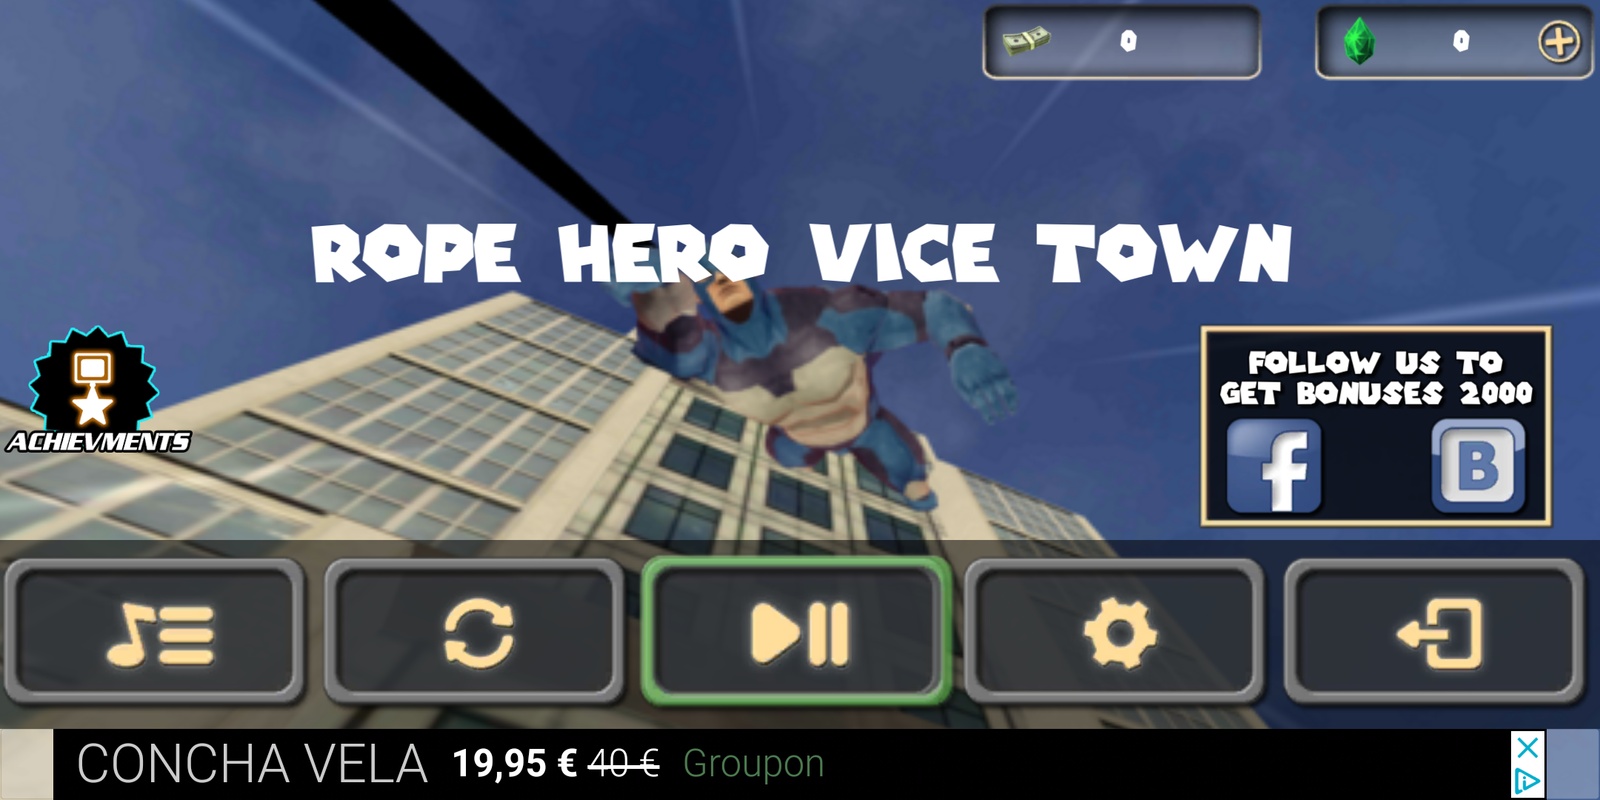 Rope Hero Vice Town 6.5.1 APK for Android Screenshot 1